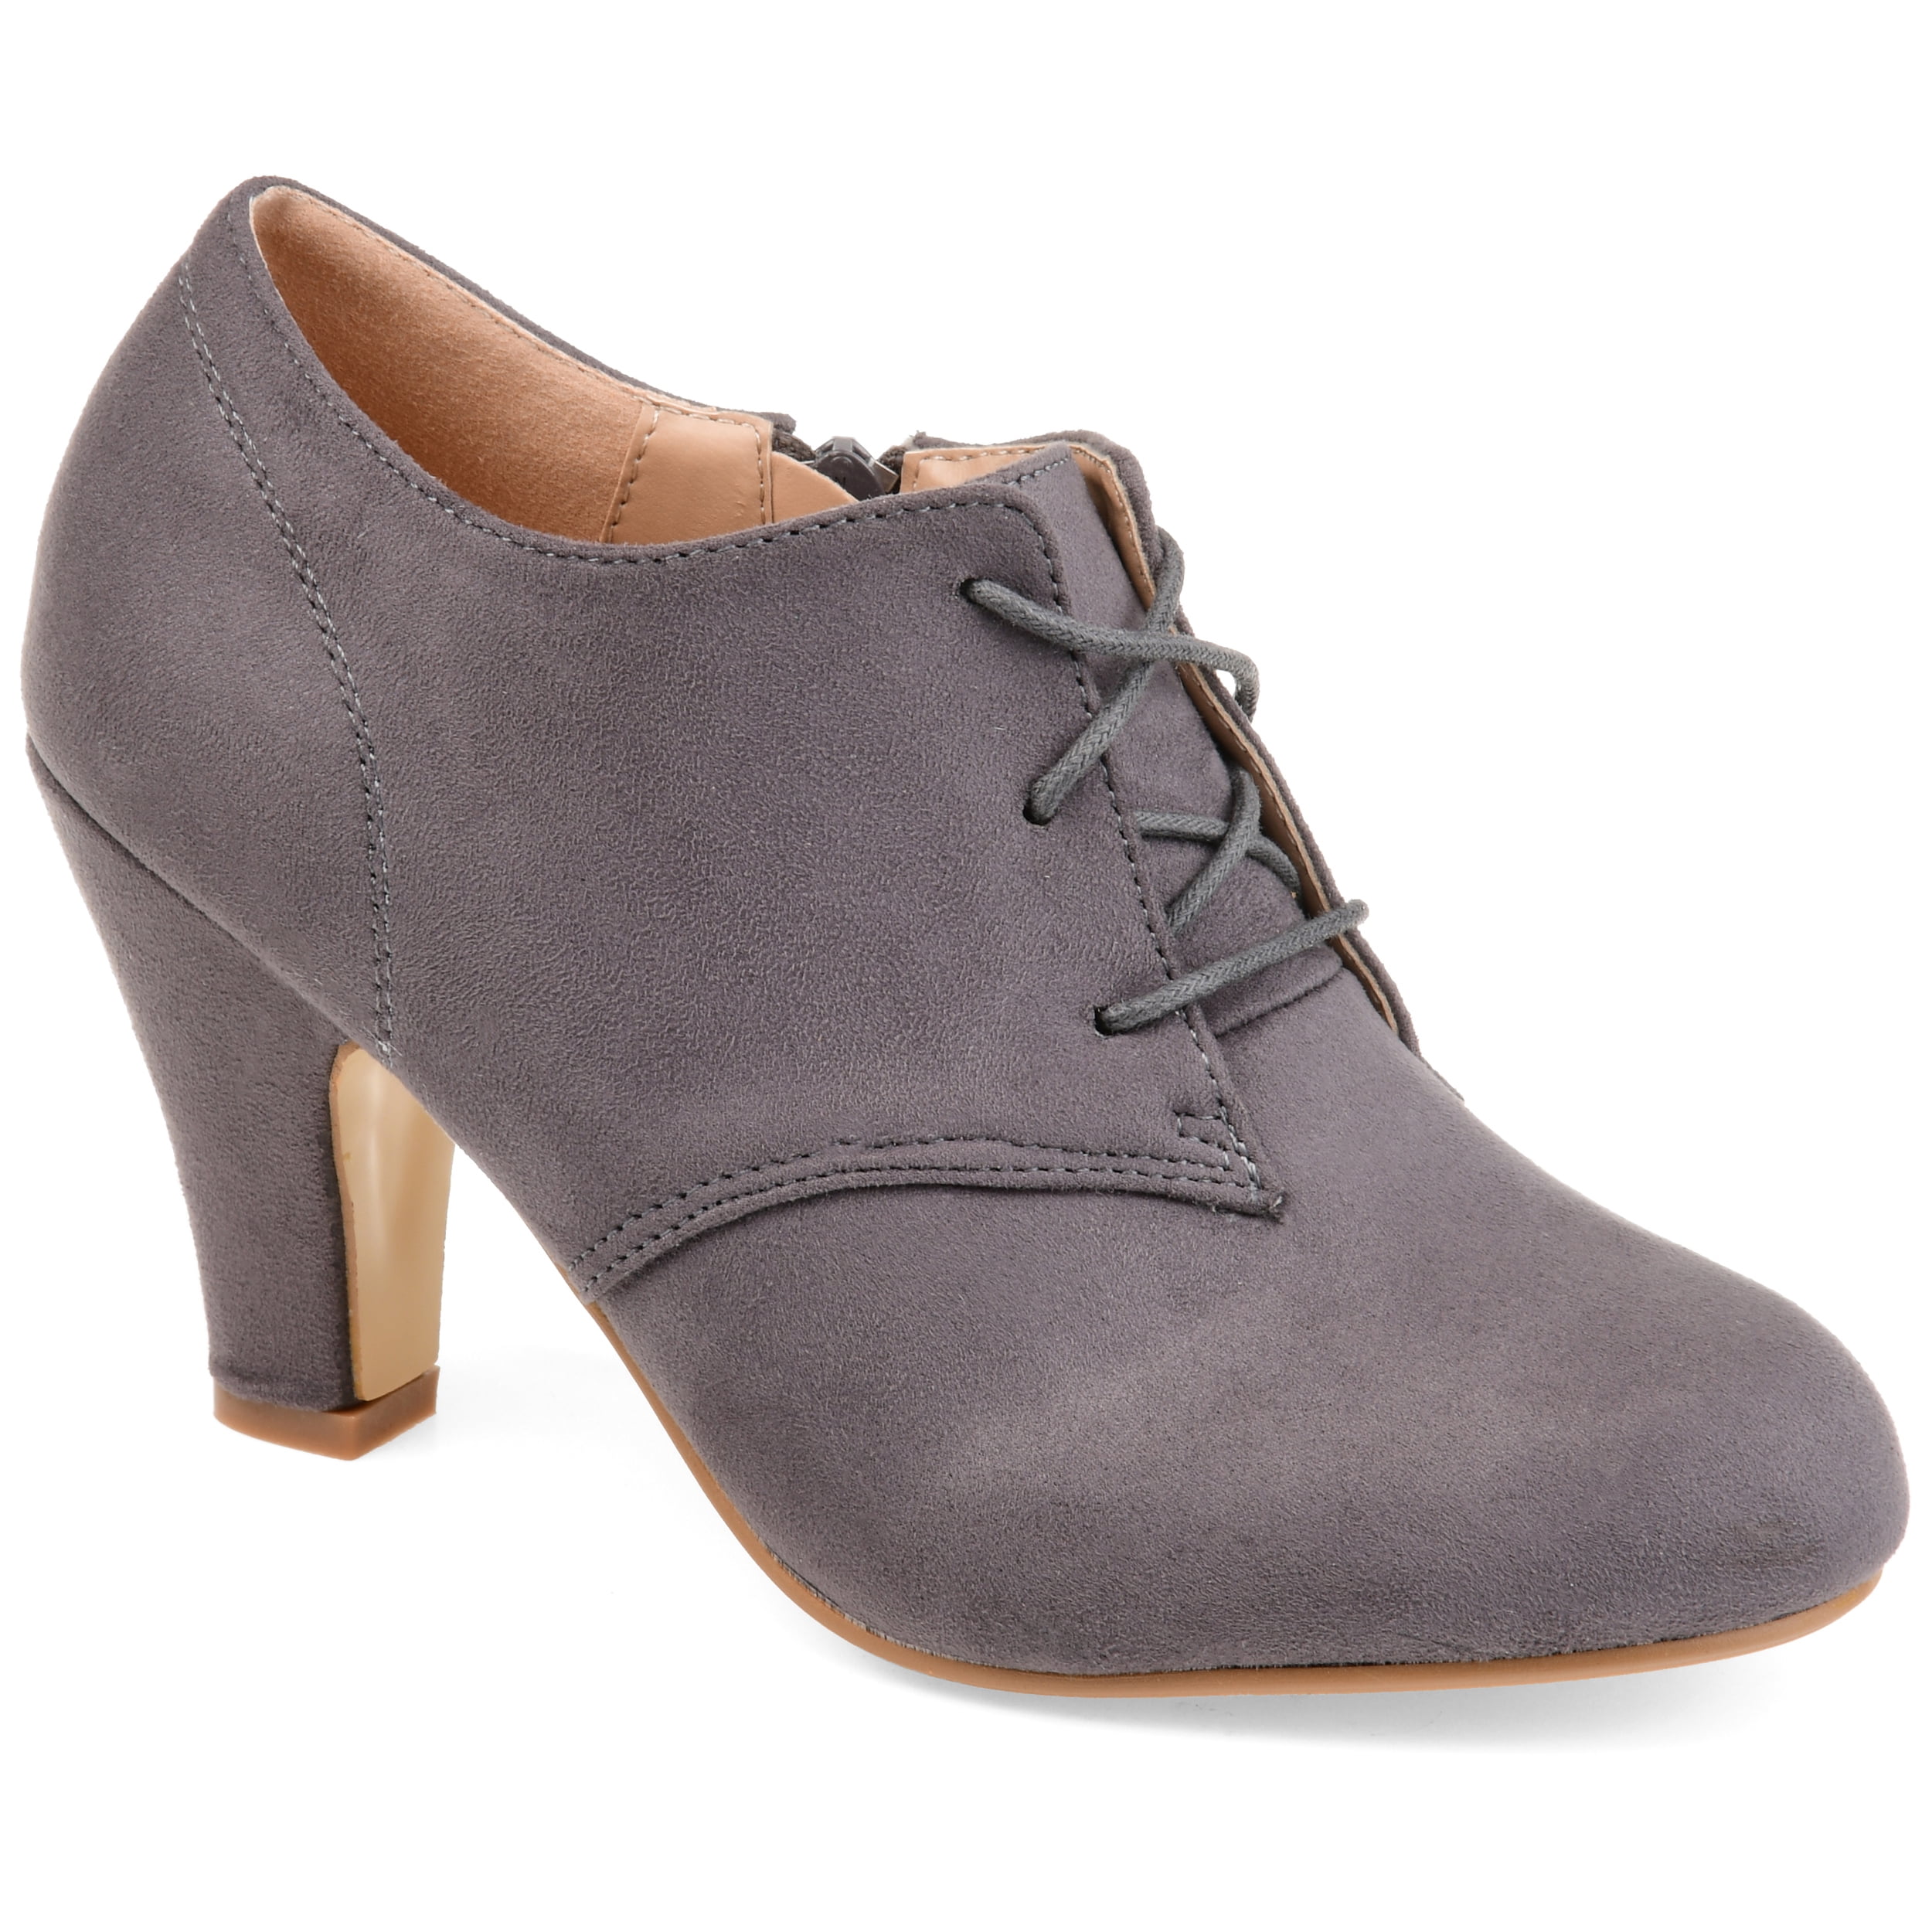 wide round toe womens shoes